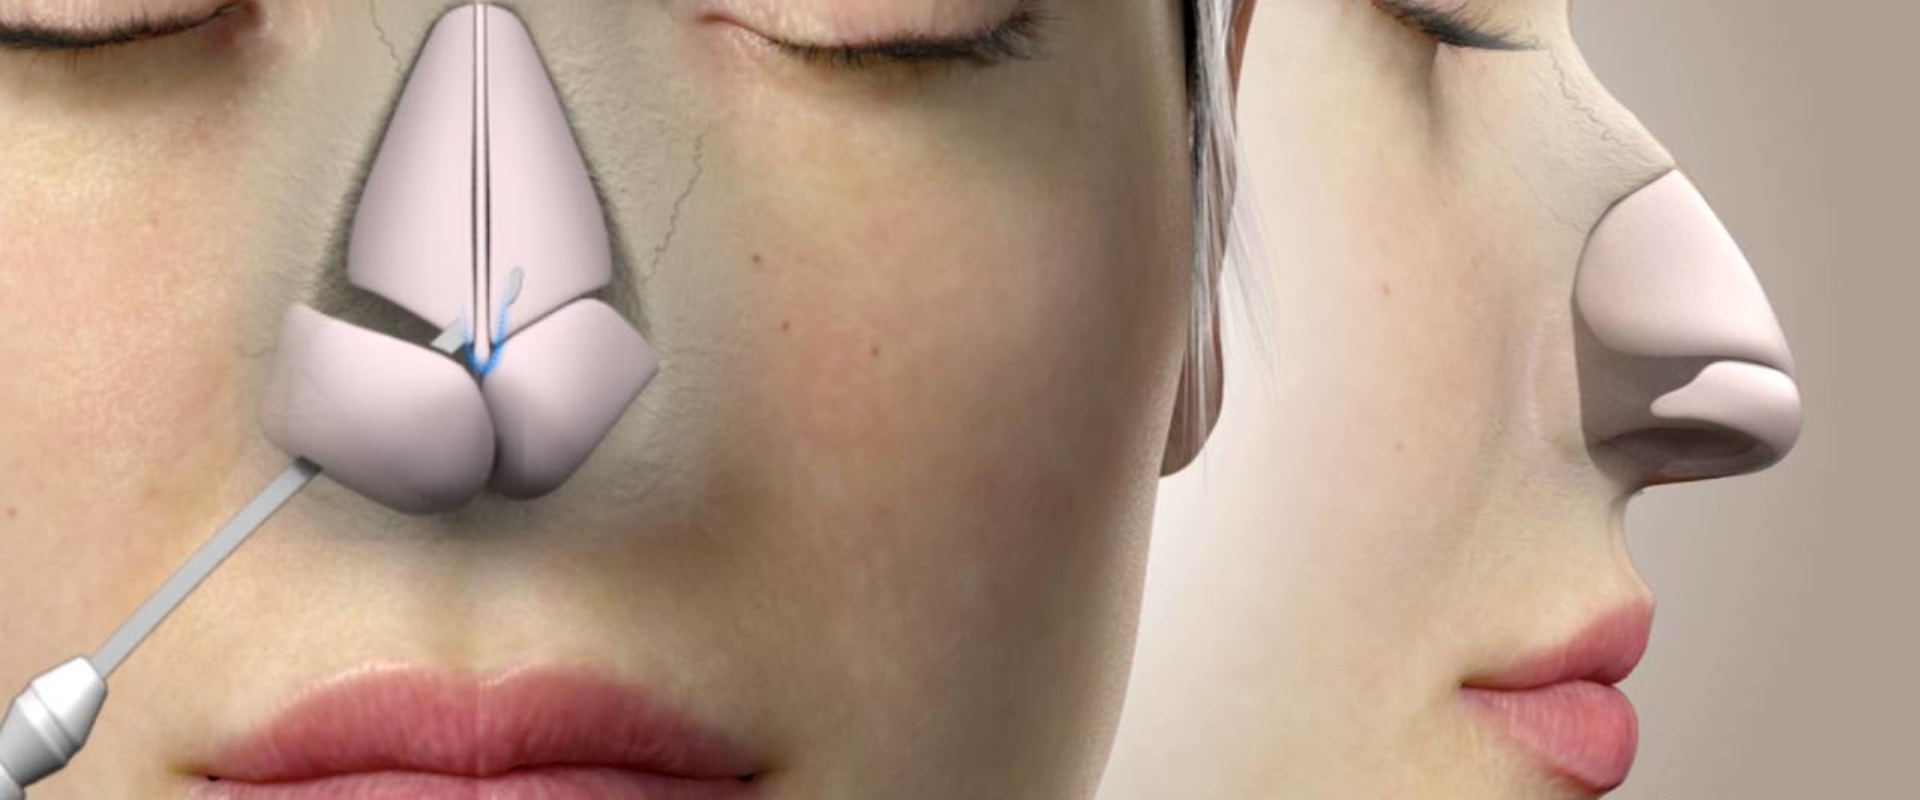 The Rise of South Korea as the Top Destination for Rhinoplasty